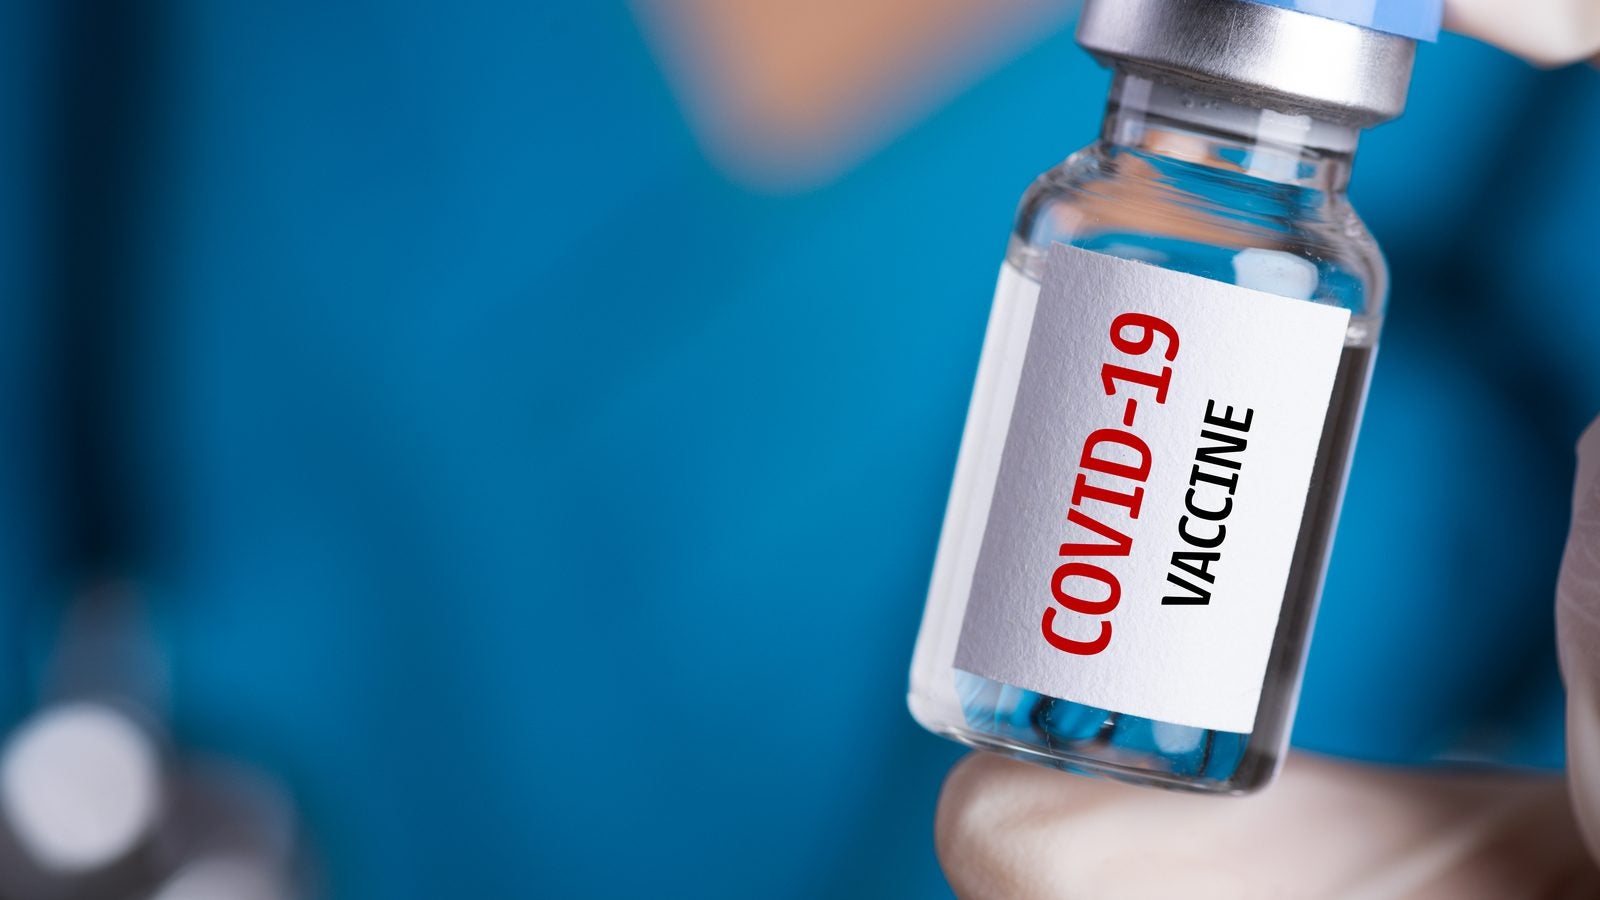 All ages should receive the updated COVID-19 vaccine, those with immunodeficiencies will benefit the most